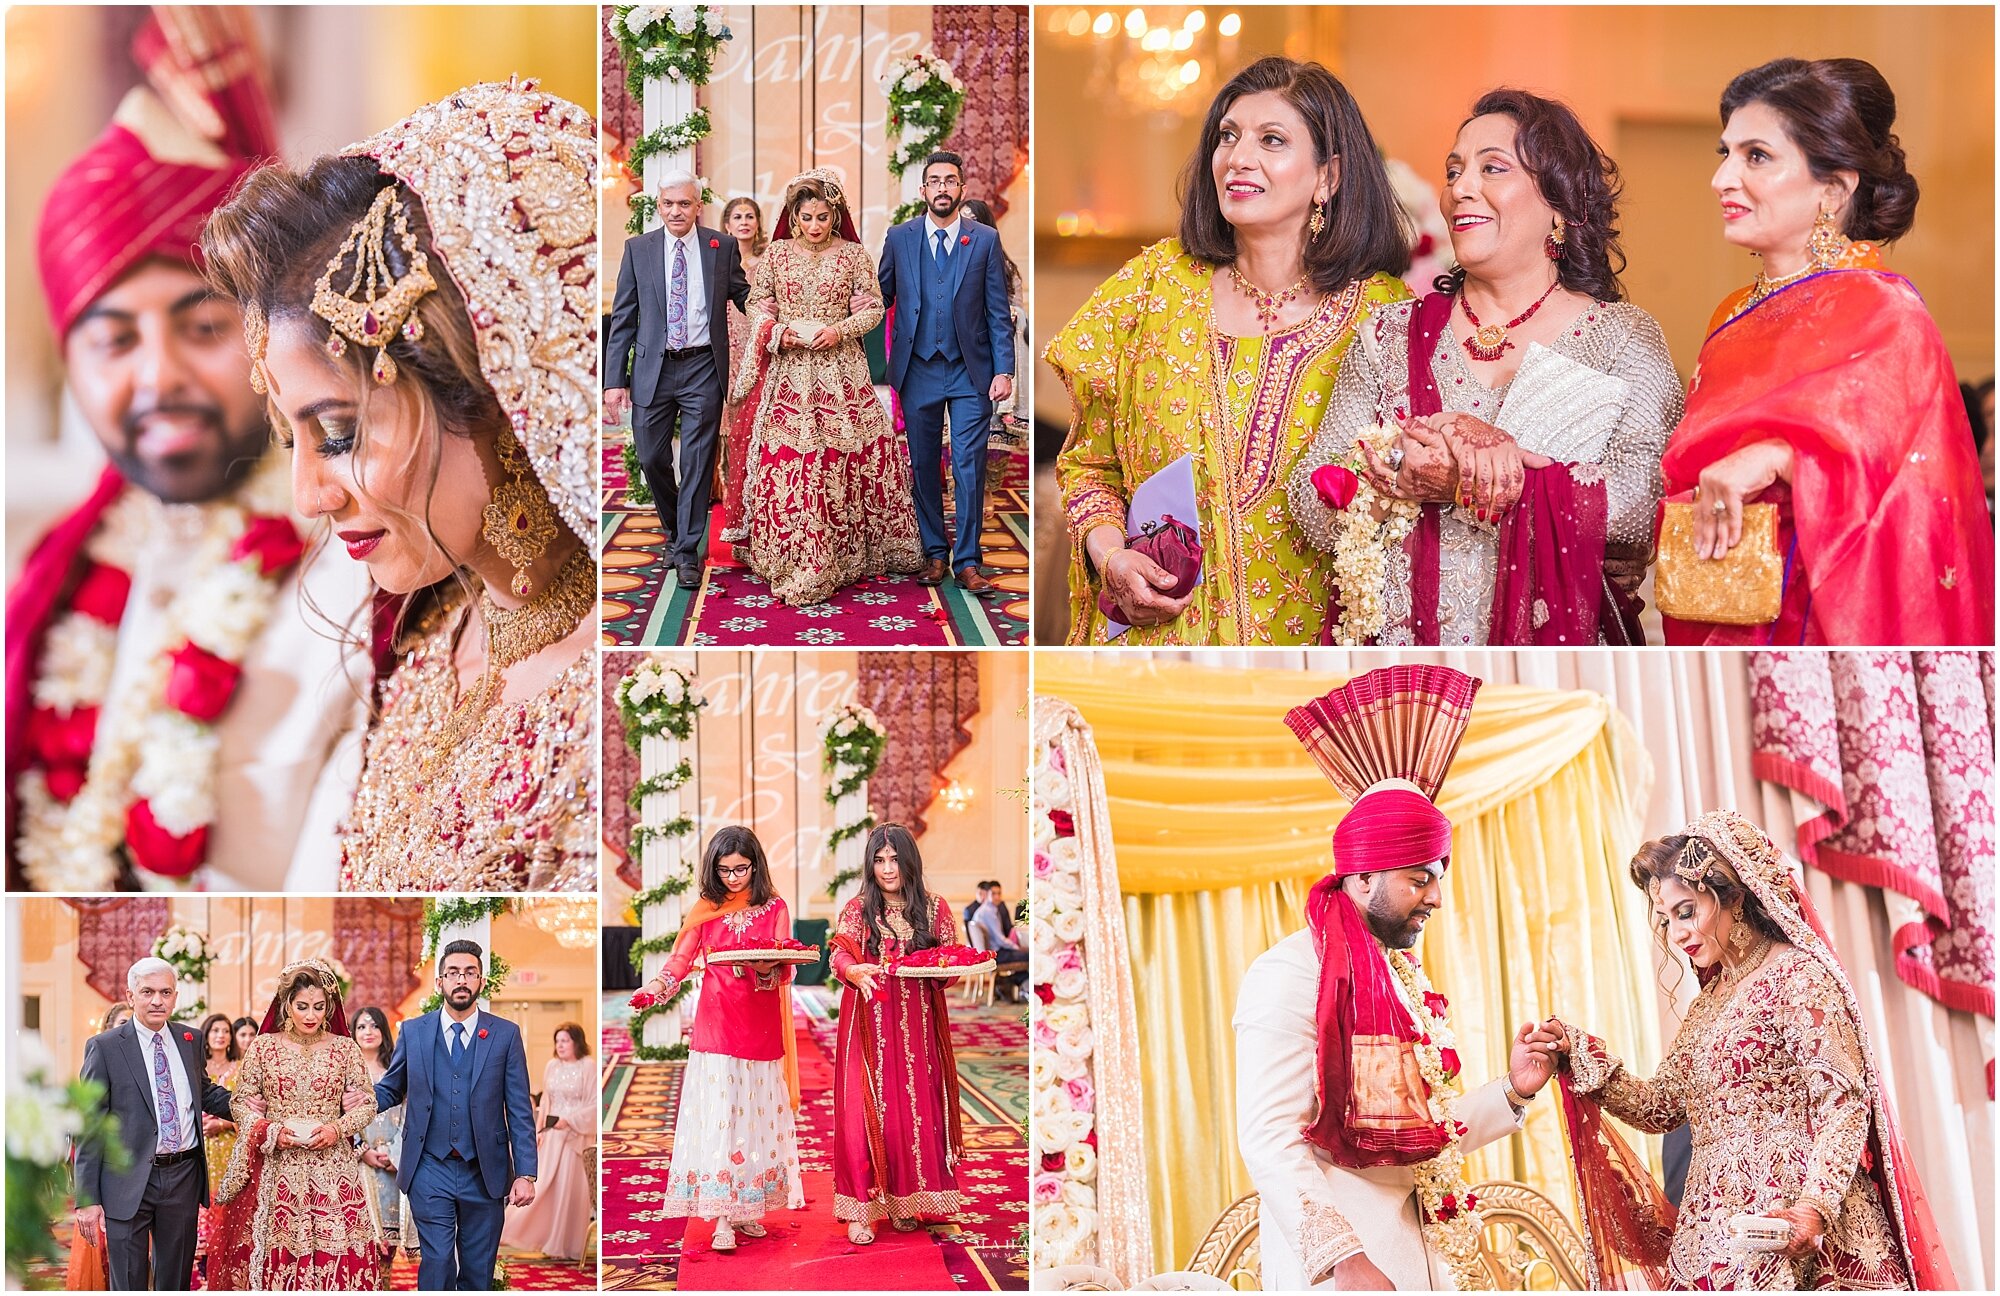 Tahreem’s formal bridal entrance was so elegant. She was accompanied by her immediate family and the cutest flower girls! The way Haris looked at his beautiful wife was very special to photograph!